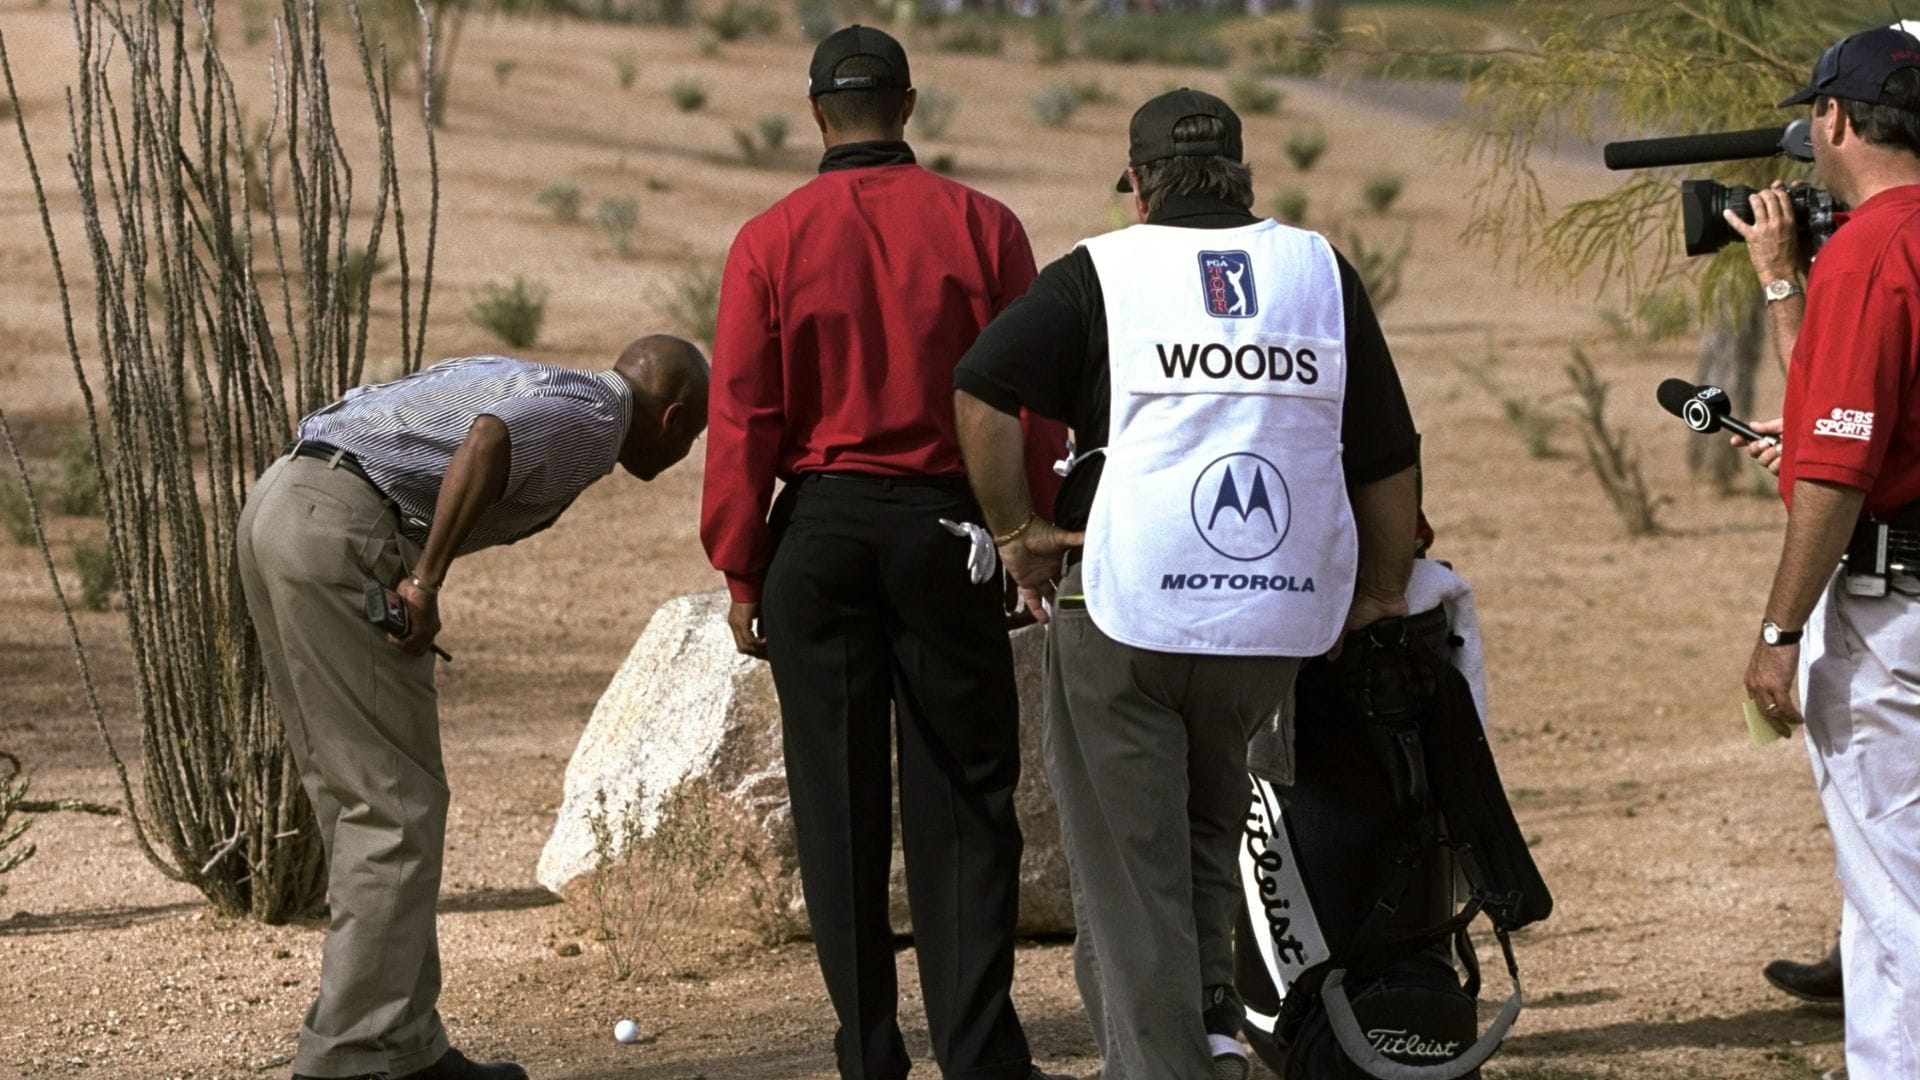 1999 WM Phoenix Open rules official recalls iconic Tiger Woods boulder ruling